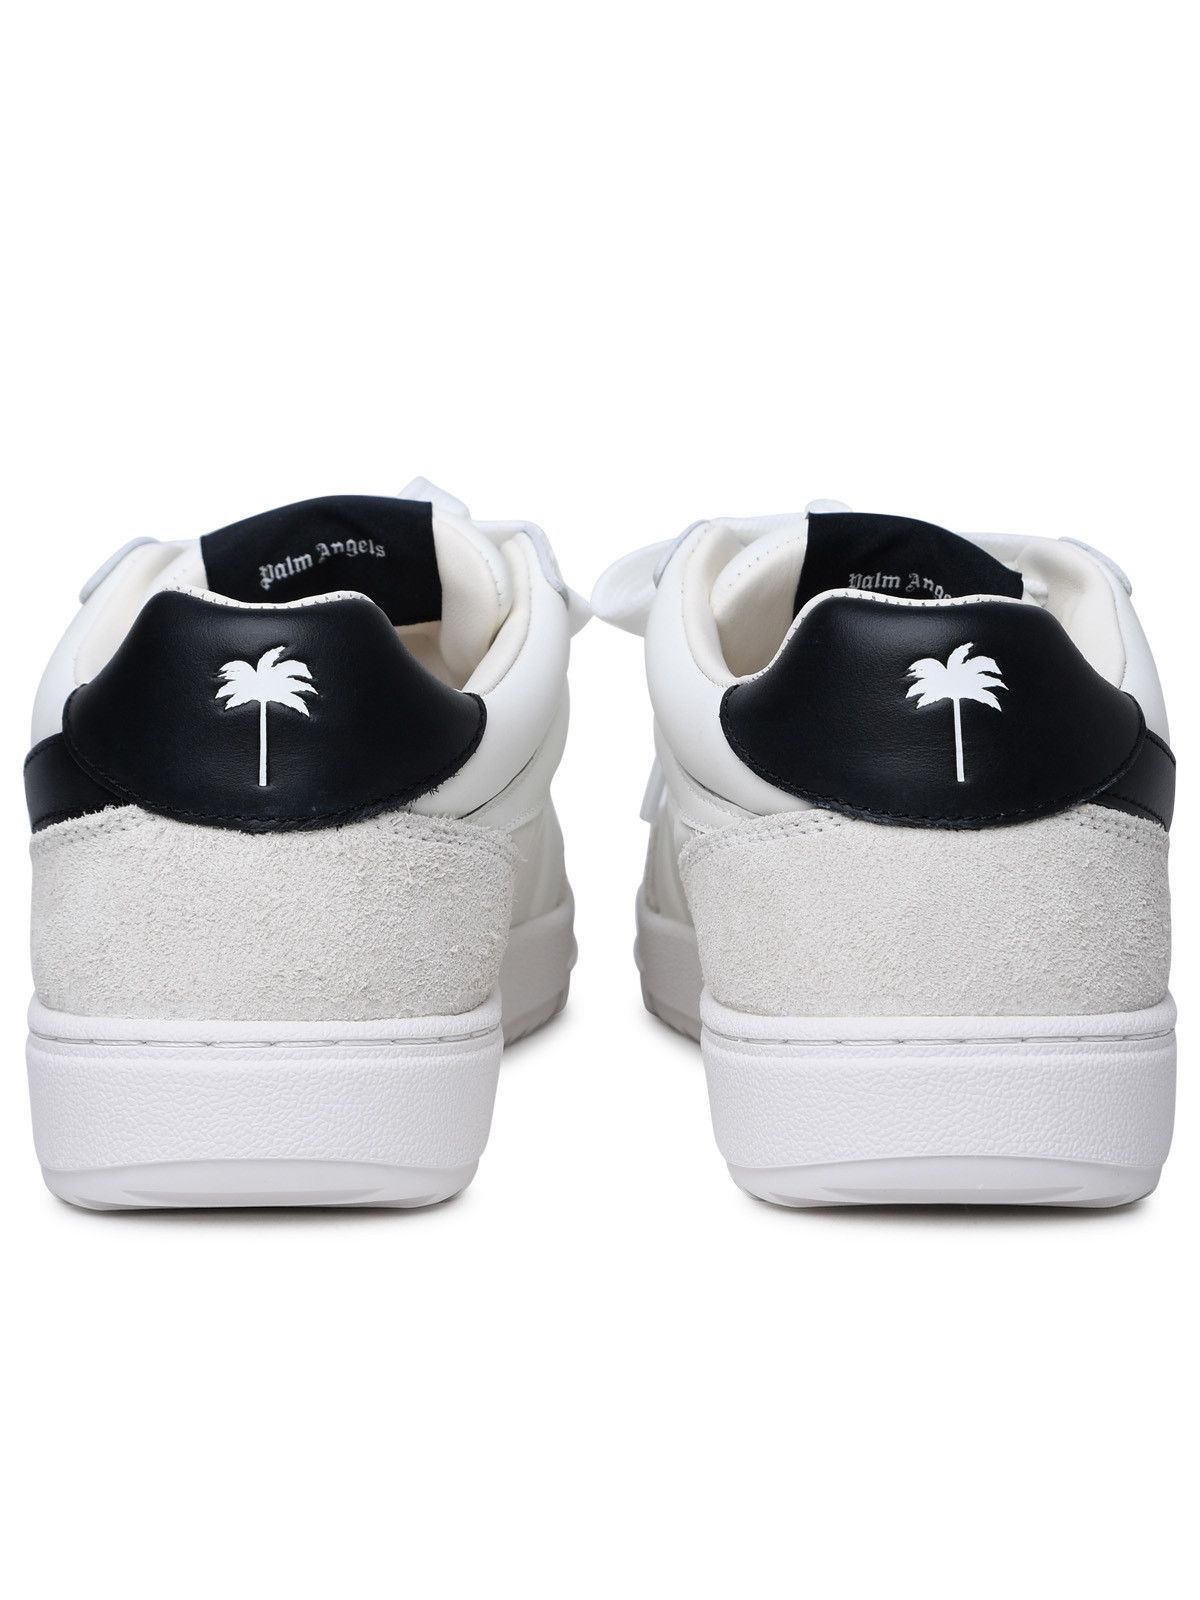 Palm Beach Leather Sneakers